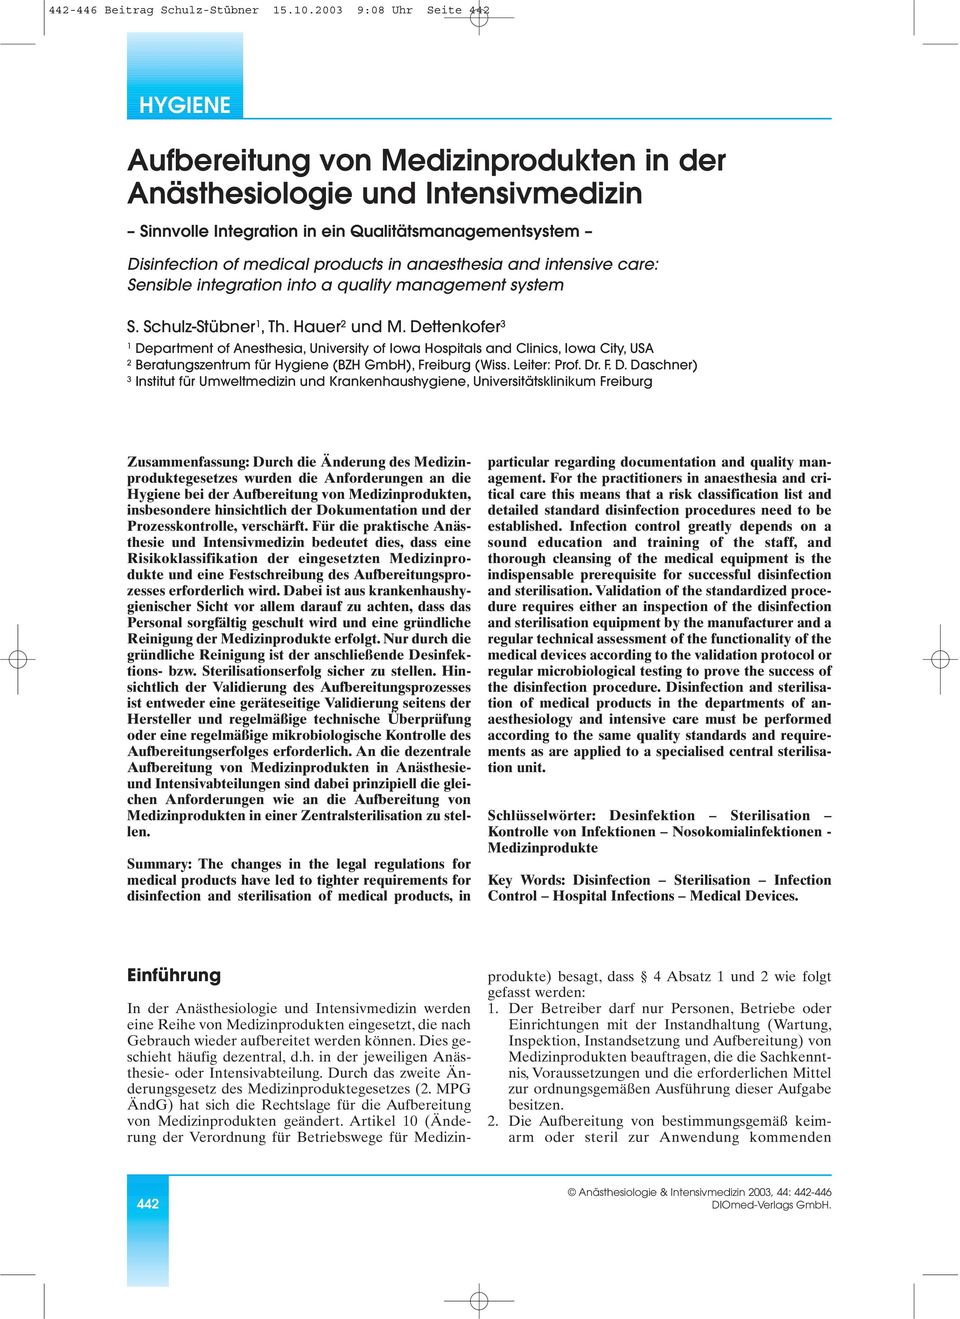 anaesthesia and intensive care: Sensible integration into a quality management system S. Schulz-Stübner 1, Th. Hauer 2 und M.